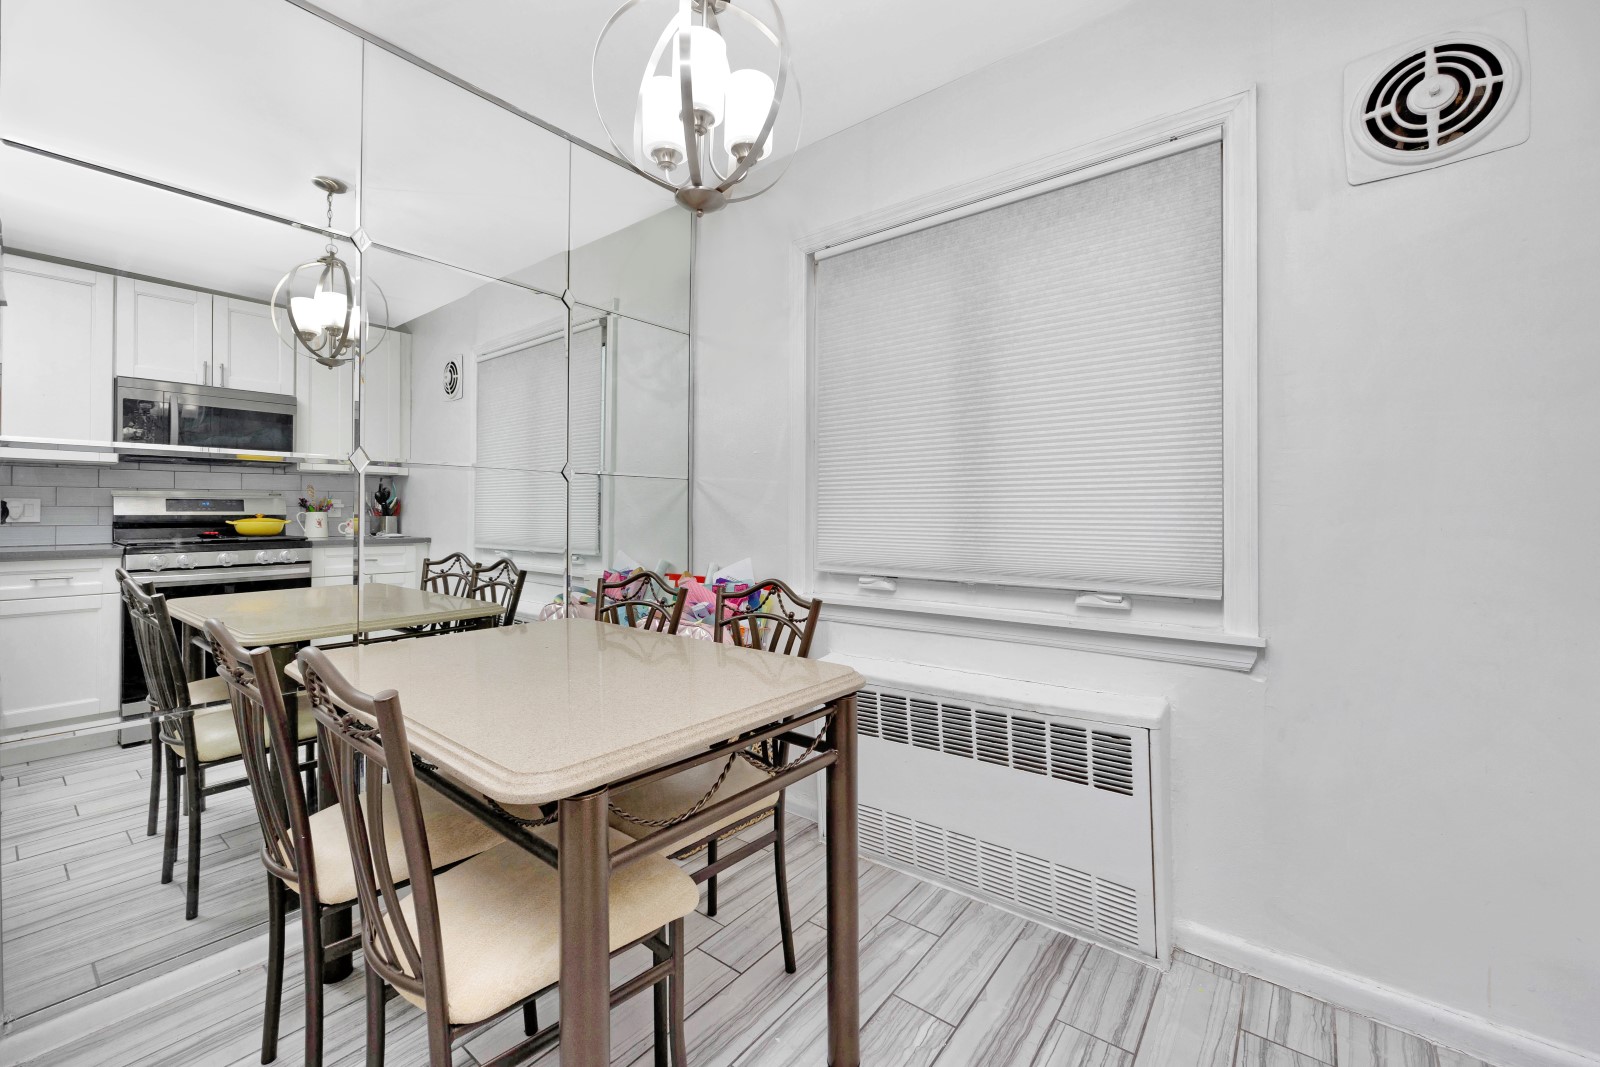 61-40 69th Lane, Middle Village, New York, 11379, United States, 4 Bedrooms Bedrooms, ,3 BathroomsBathrooms,Residential,For Sale,61-40 69th Lane,1501943